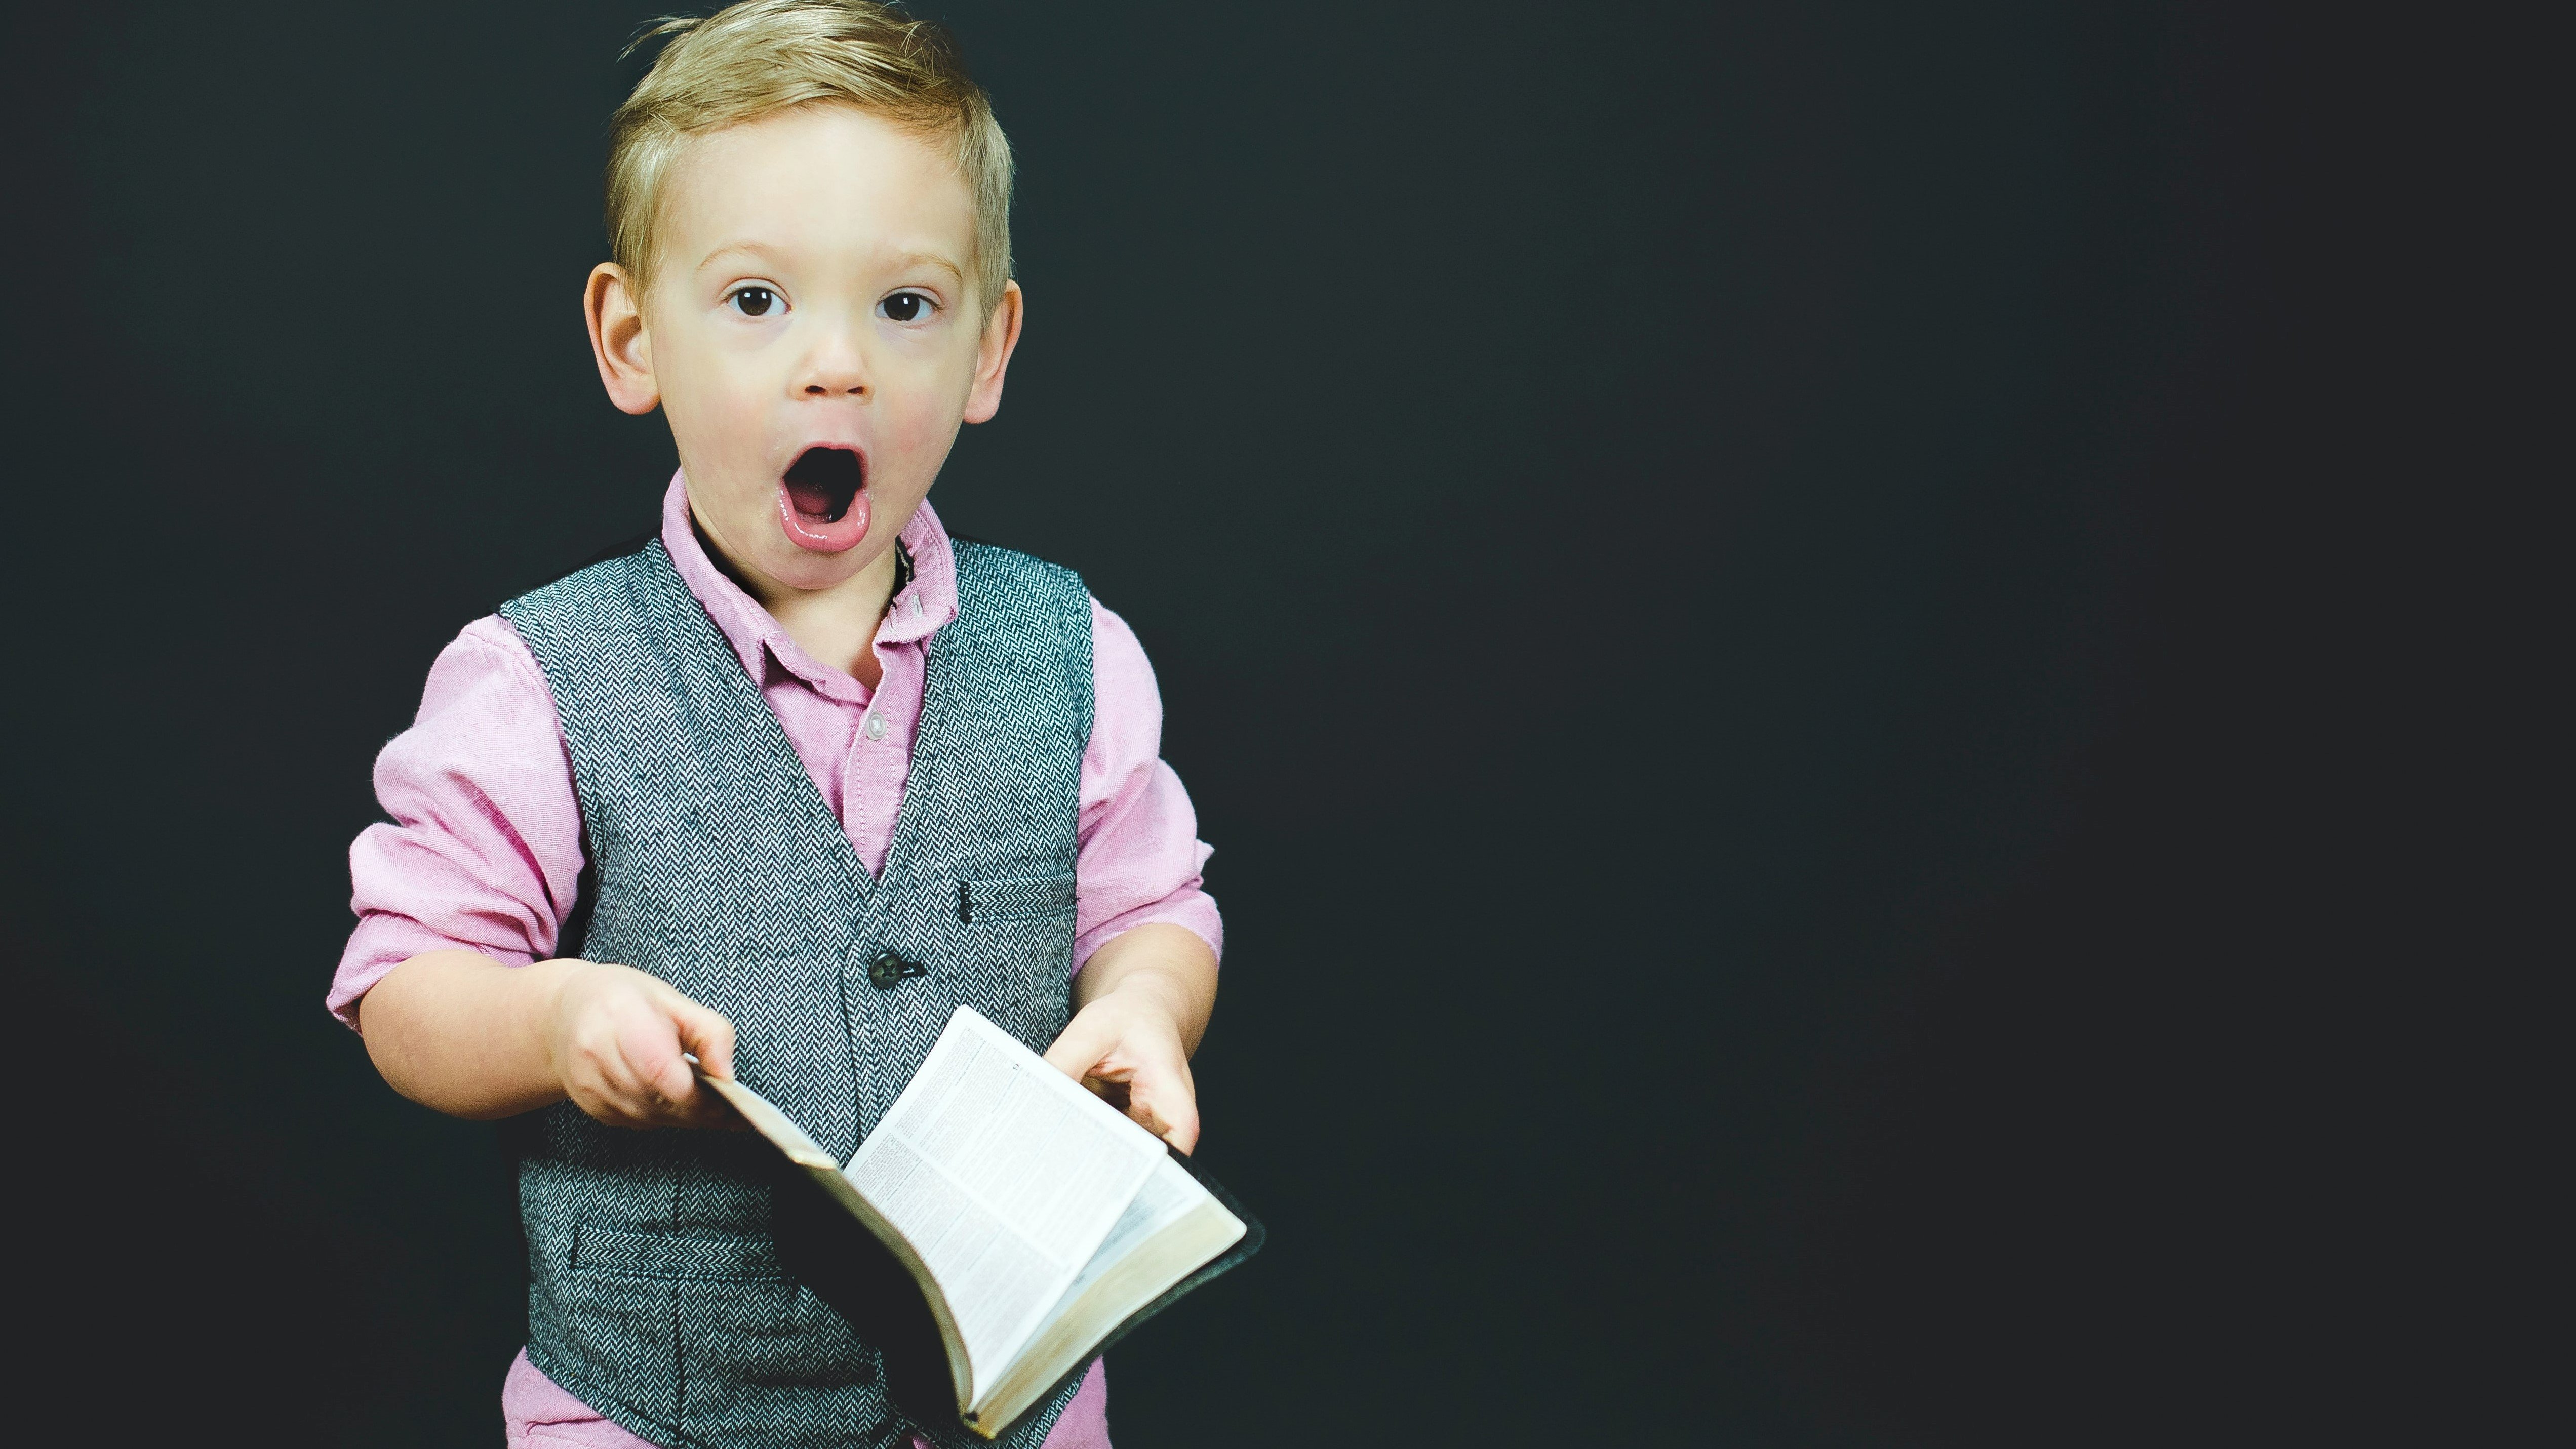 Boy with surprised expression holding book